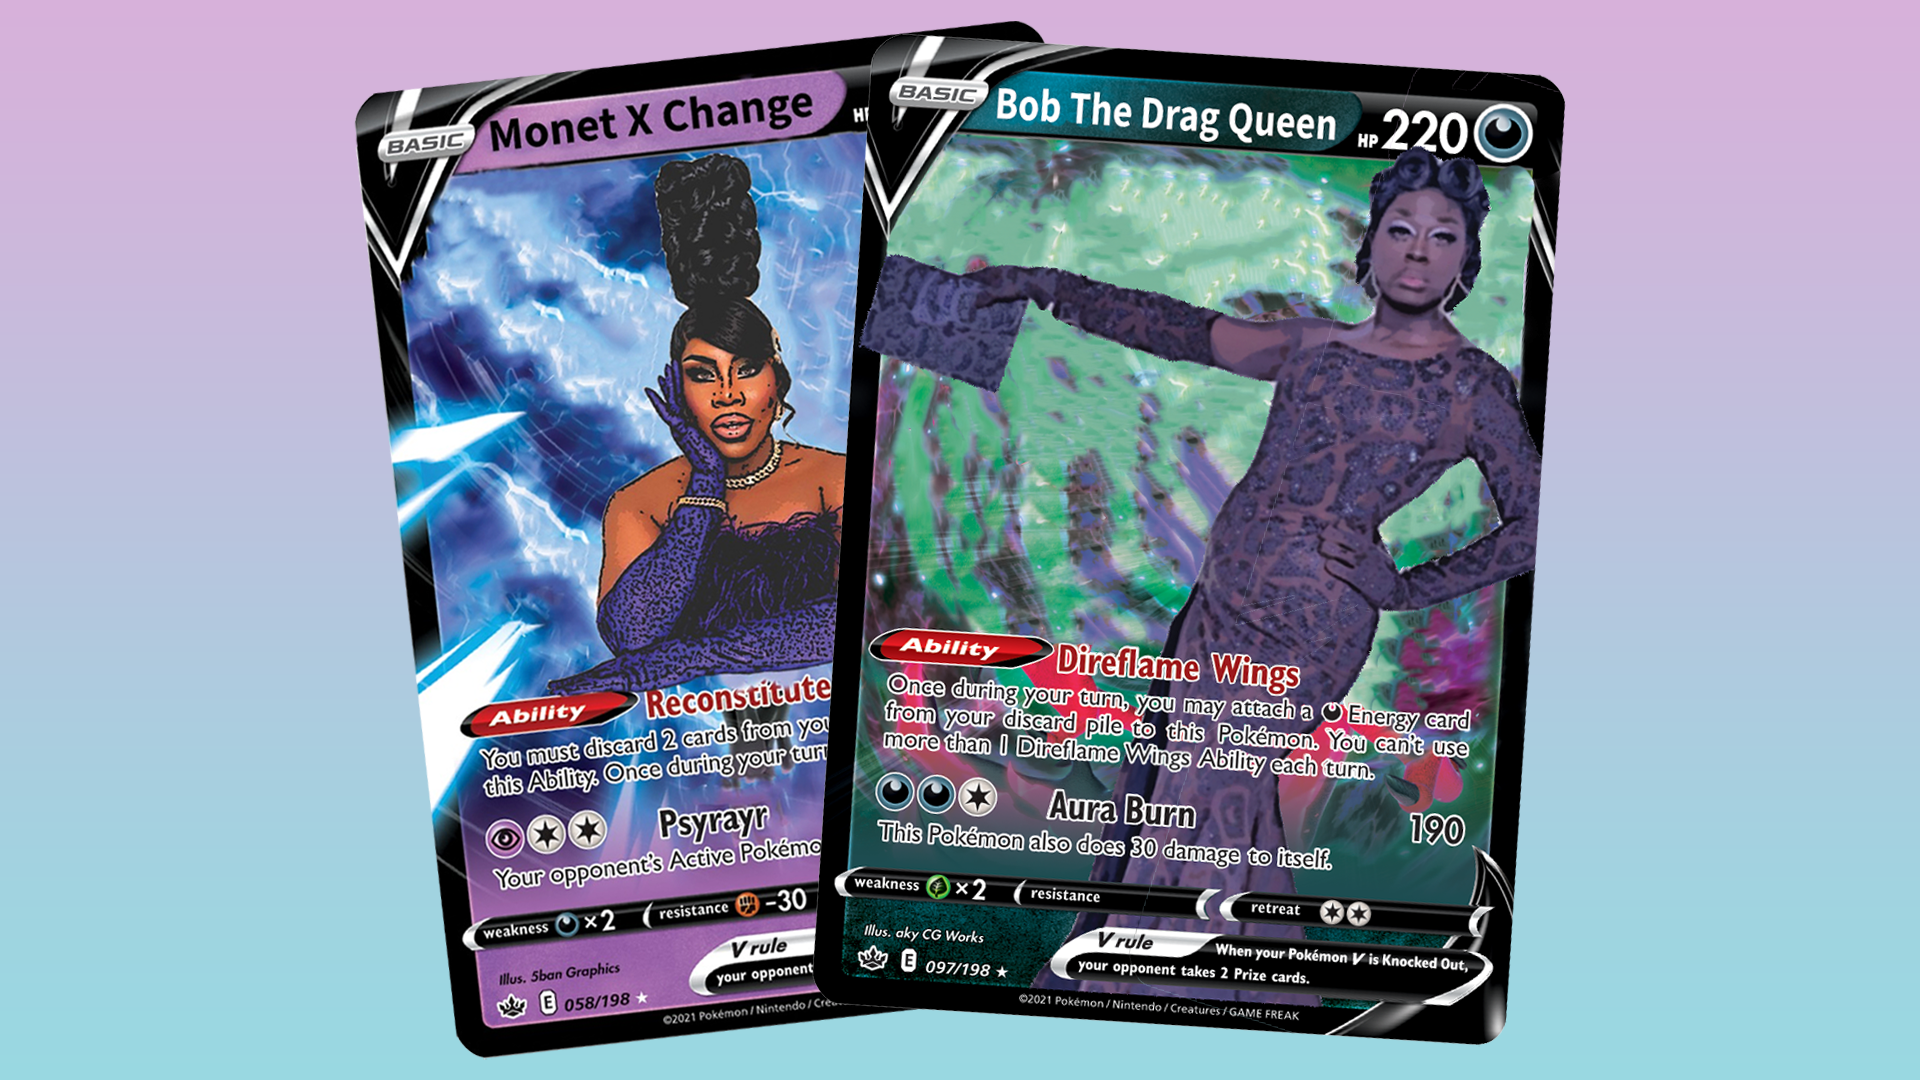 Image for Why isn’t there a Drag Race trading card game yet?